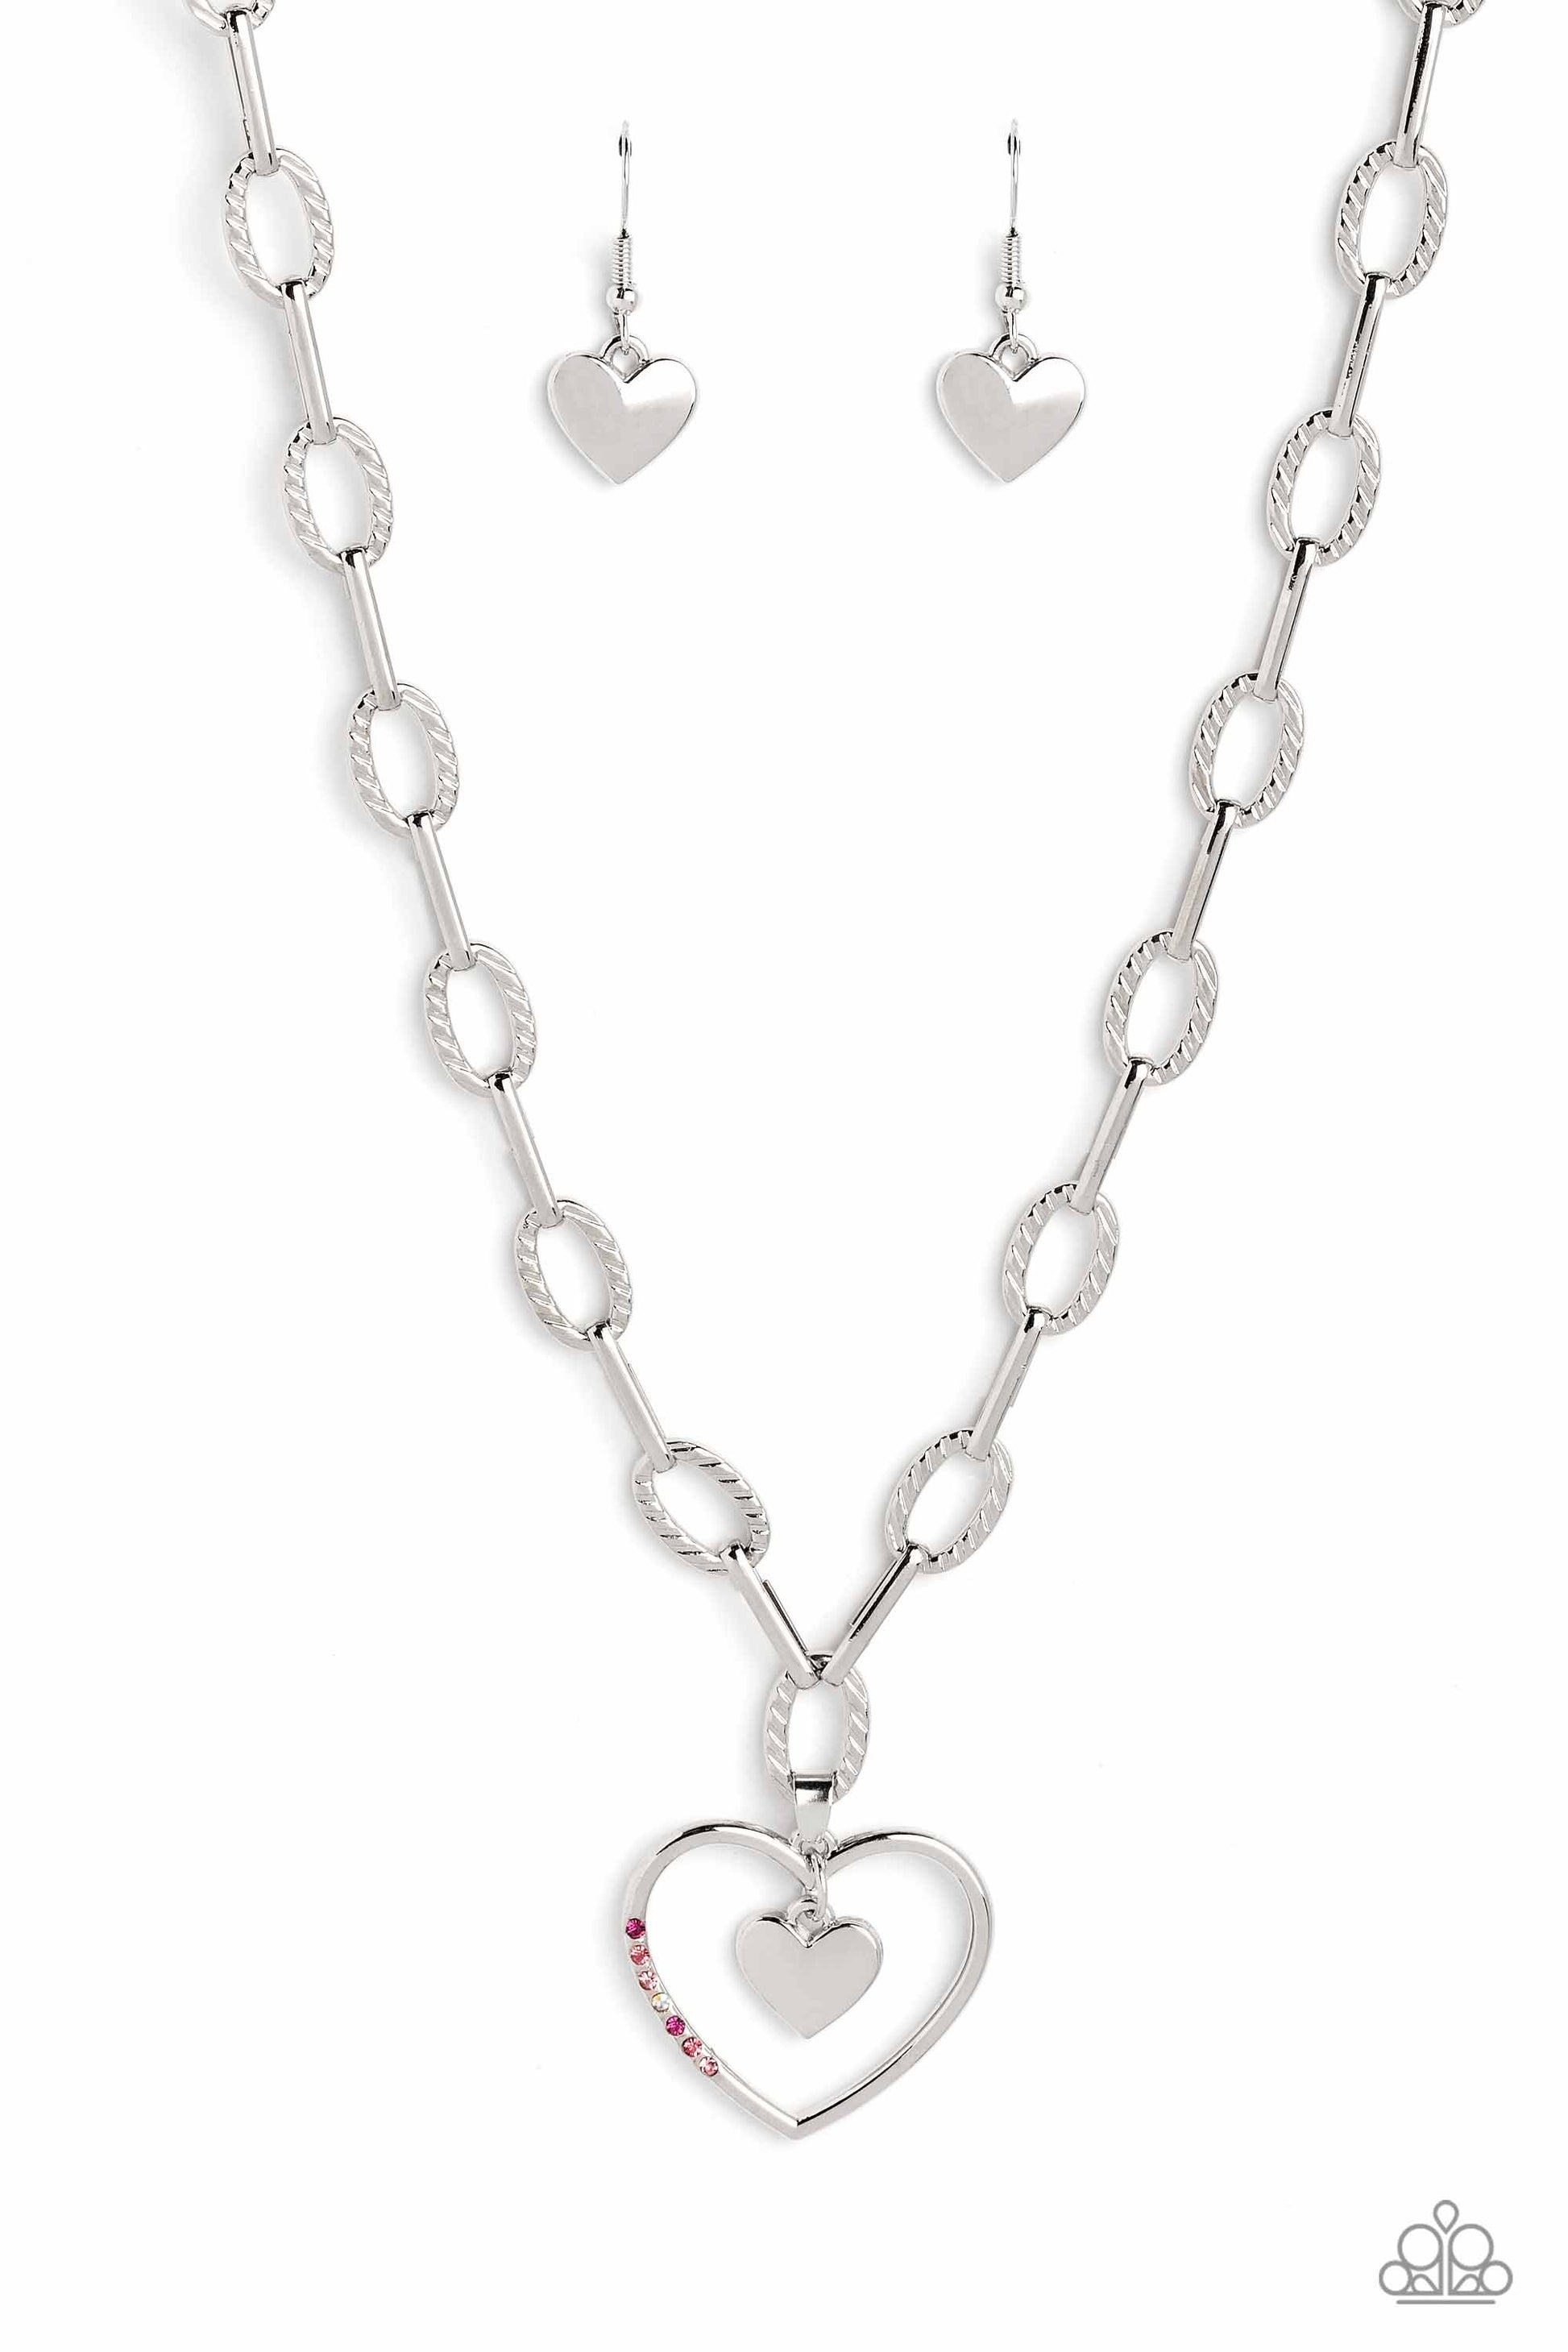 Refulgent Romance - Pink and Silver Heart Necklace - Textured ovals and elongated silver links lead the eye down to an oversized, airy, silver heart frame. Encrusted along one of the curves of the silver heart, dainty rhinestones in shades of pink, including fuchsia, rose, light rose, and iridescence, glimmer for a subtle pop of color. Dangling inside the oversized heart frame, a silver heart pendant swings for a romantic finish.